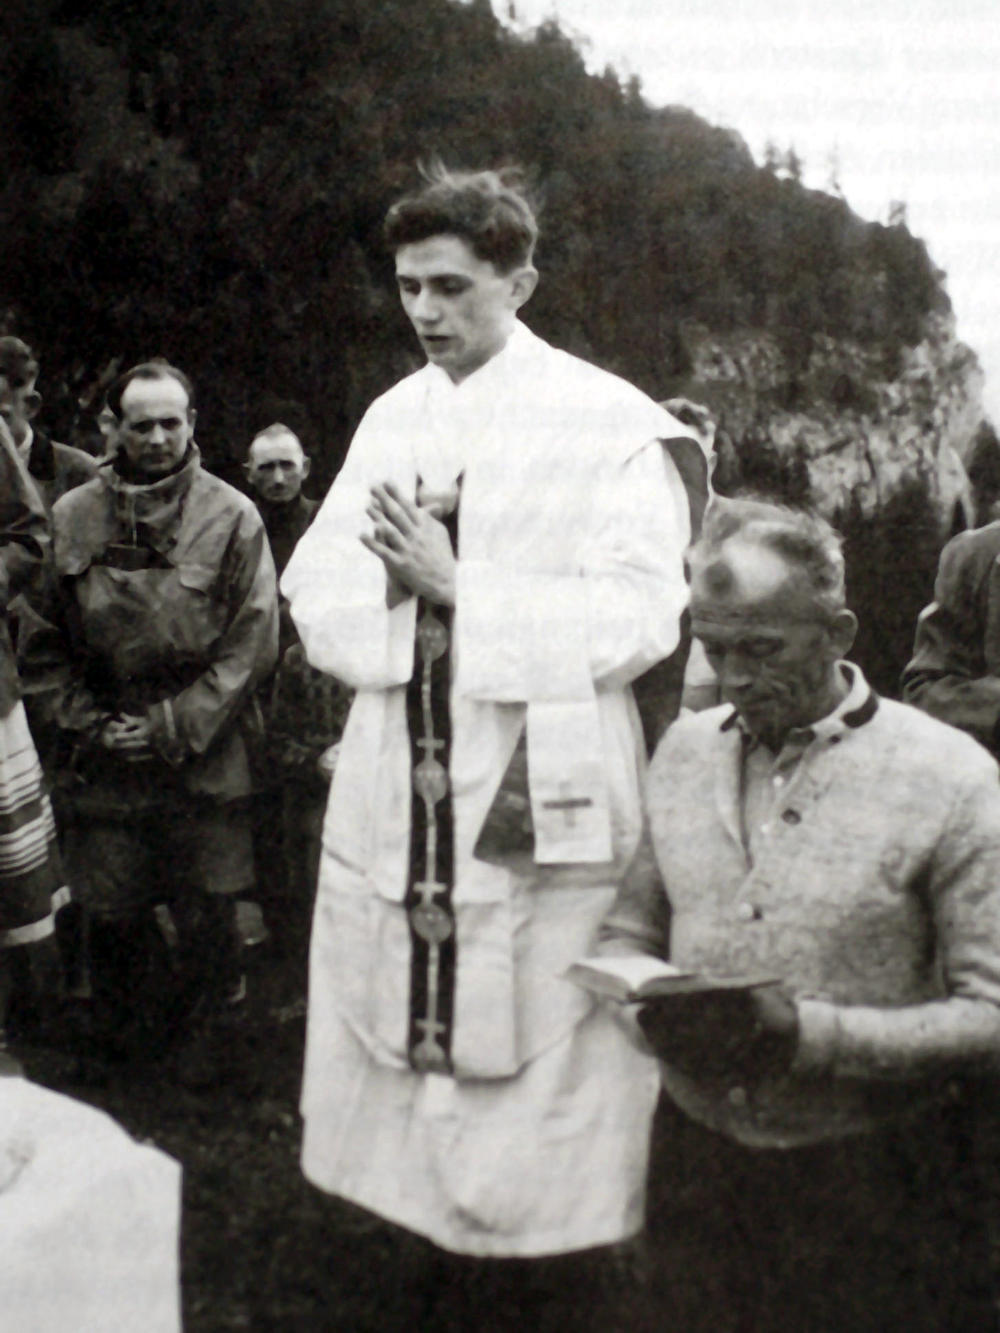 German priest Joseph Ratzinger (center) prays during an open-air Mass in the summer of 1952 near Ruhpolding in the German state of Bavaria.